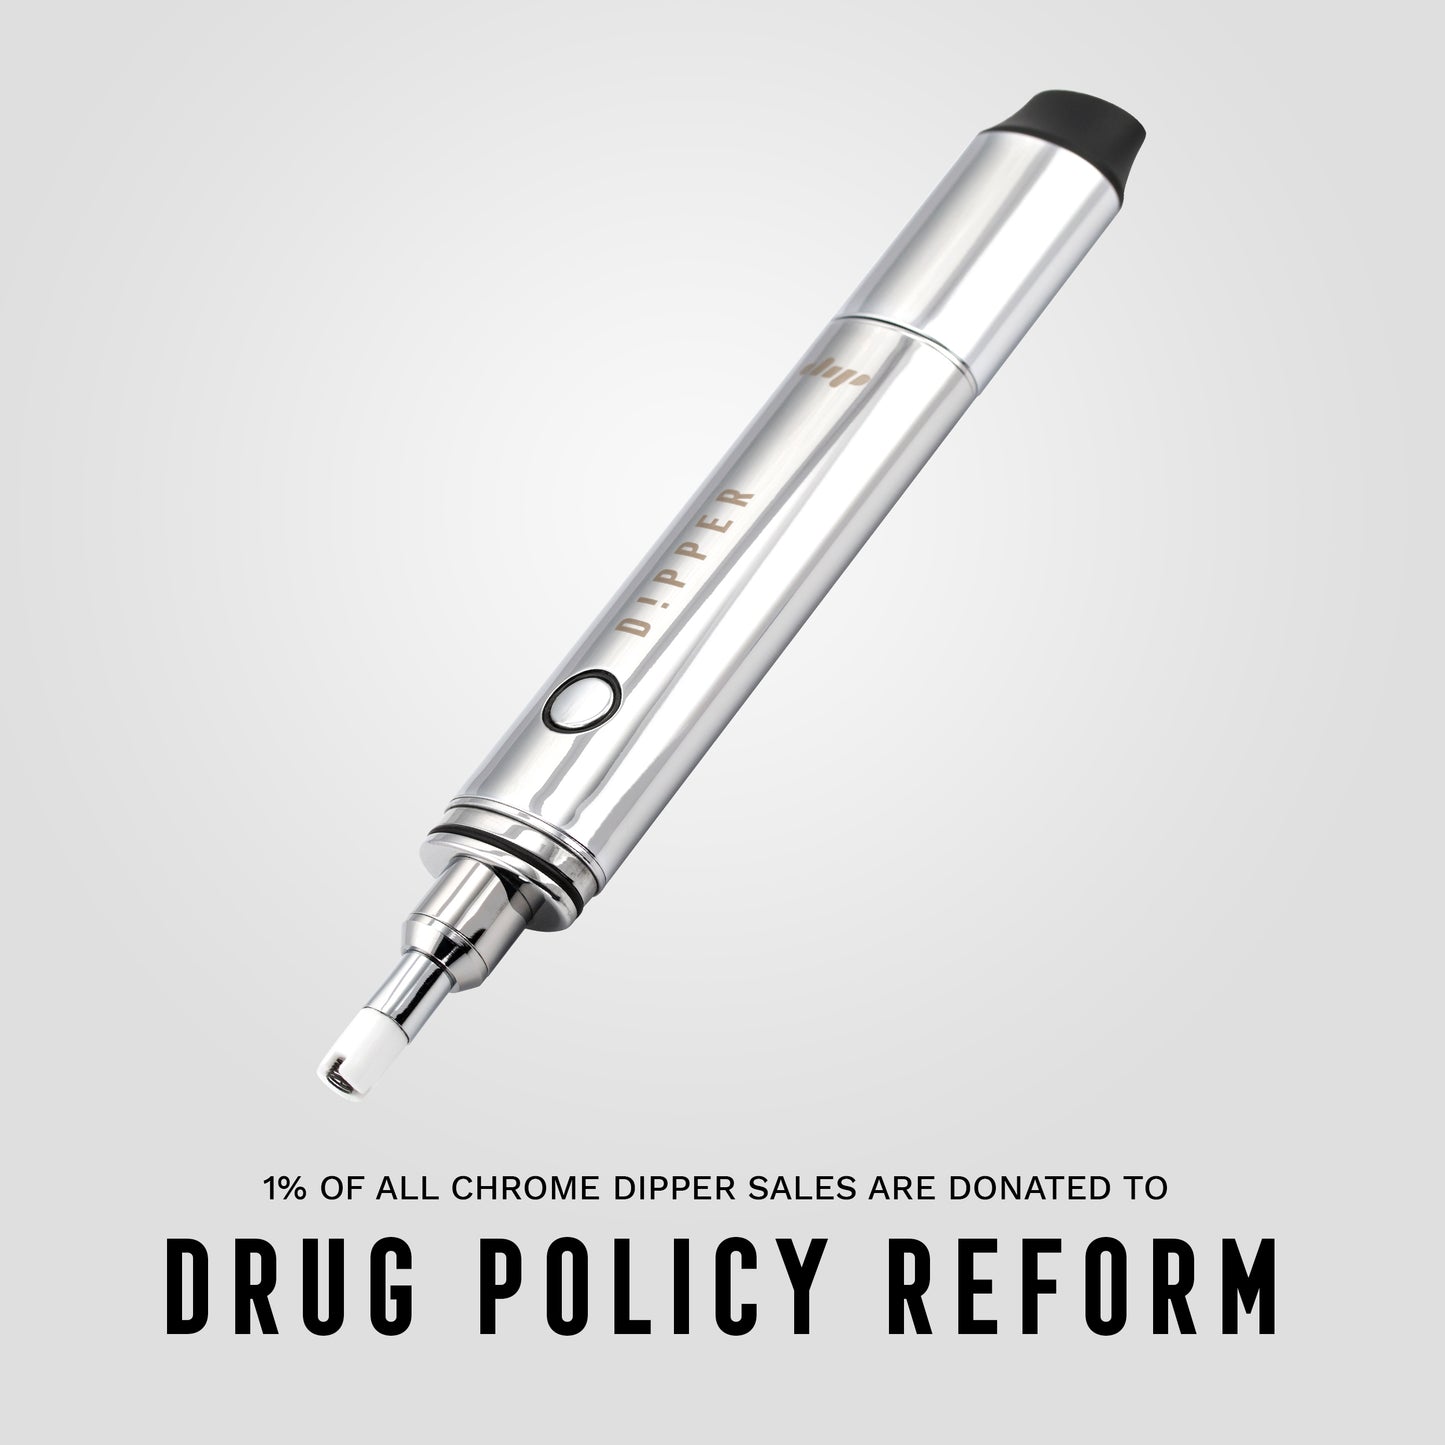 Chrome Dipper vaporizer with 1% of proceeds benefiting Drug Policy Reform